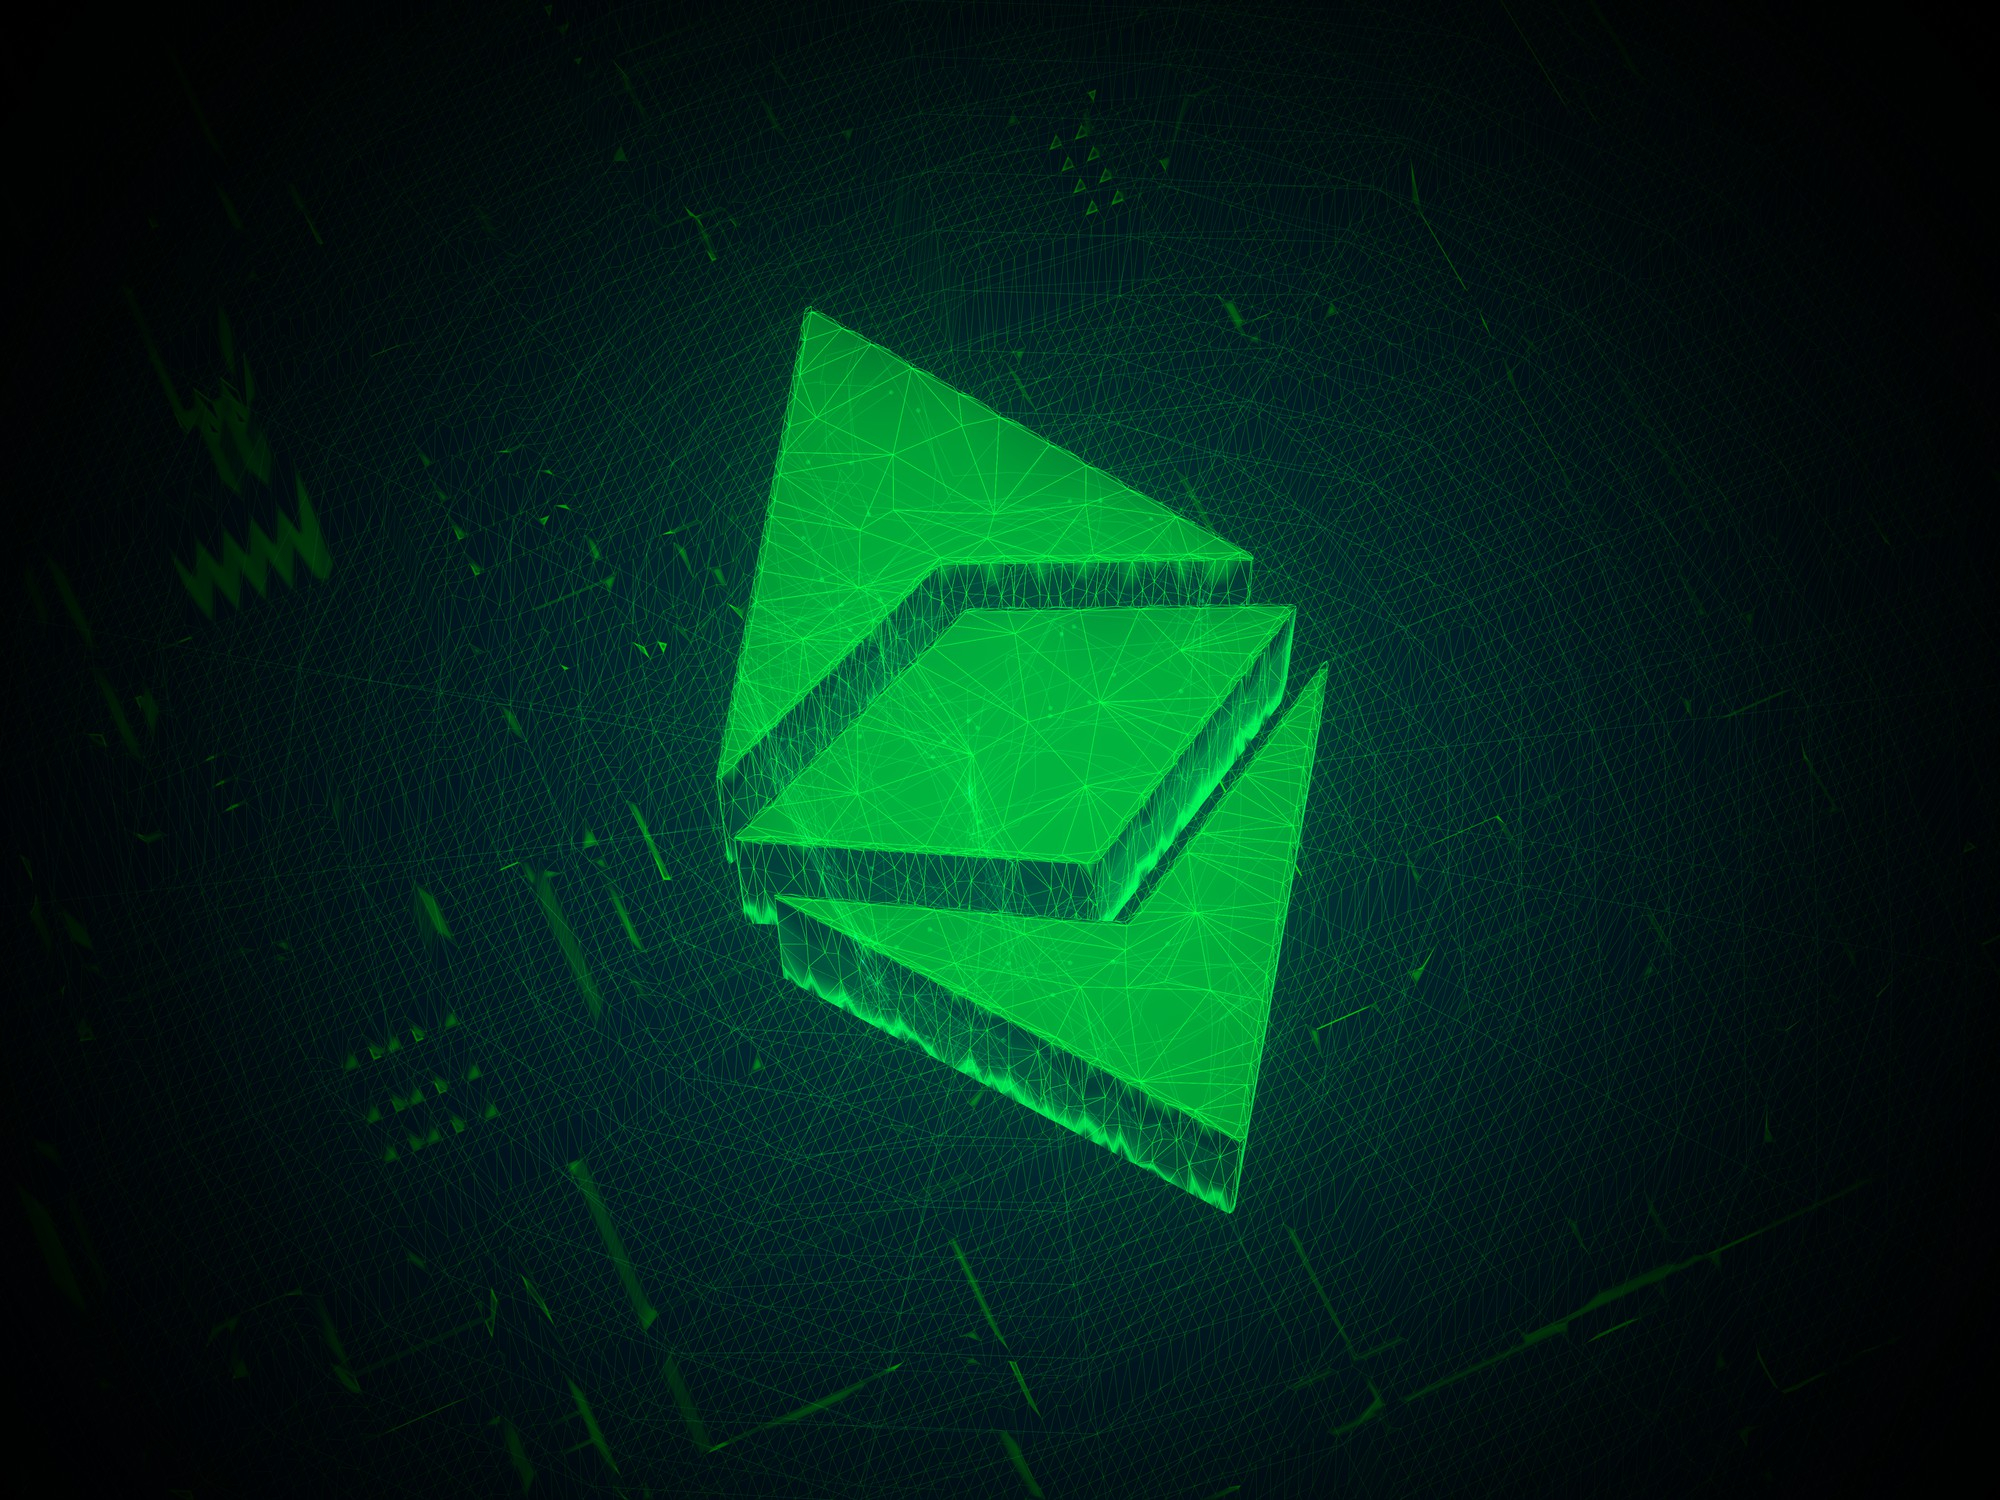 A holographic, geometric shape resembling a digital currency symbol, glowing in neon green, floats on a dark, textured background with abstract digital elements. The shape's low-poly structure suggests a connection to digital networks and cryptocurrency technology.